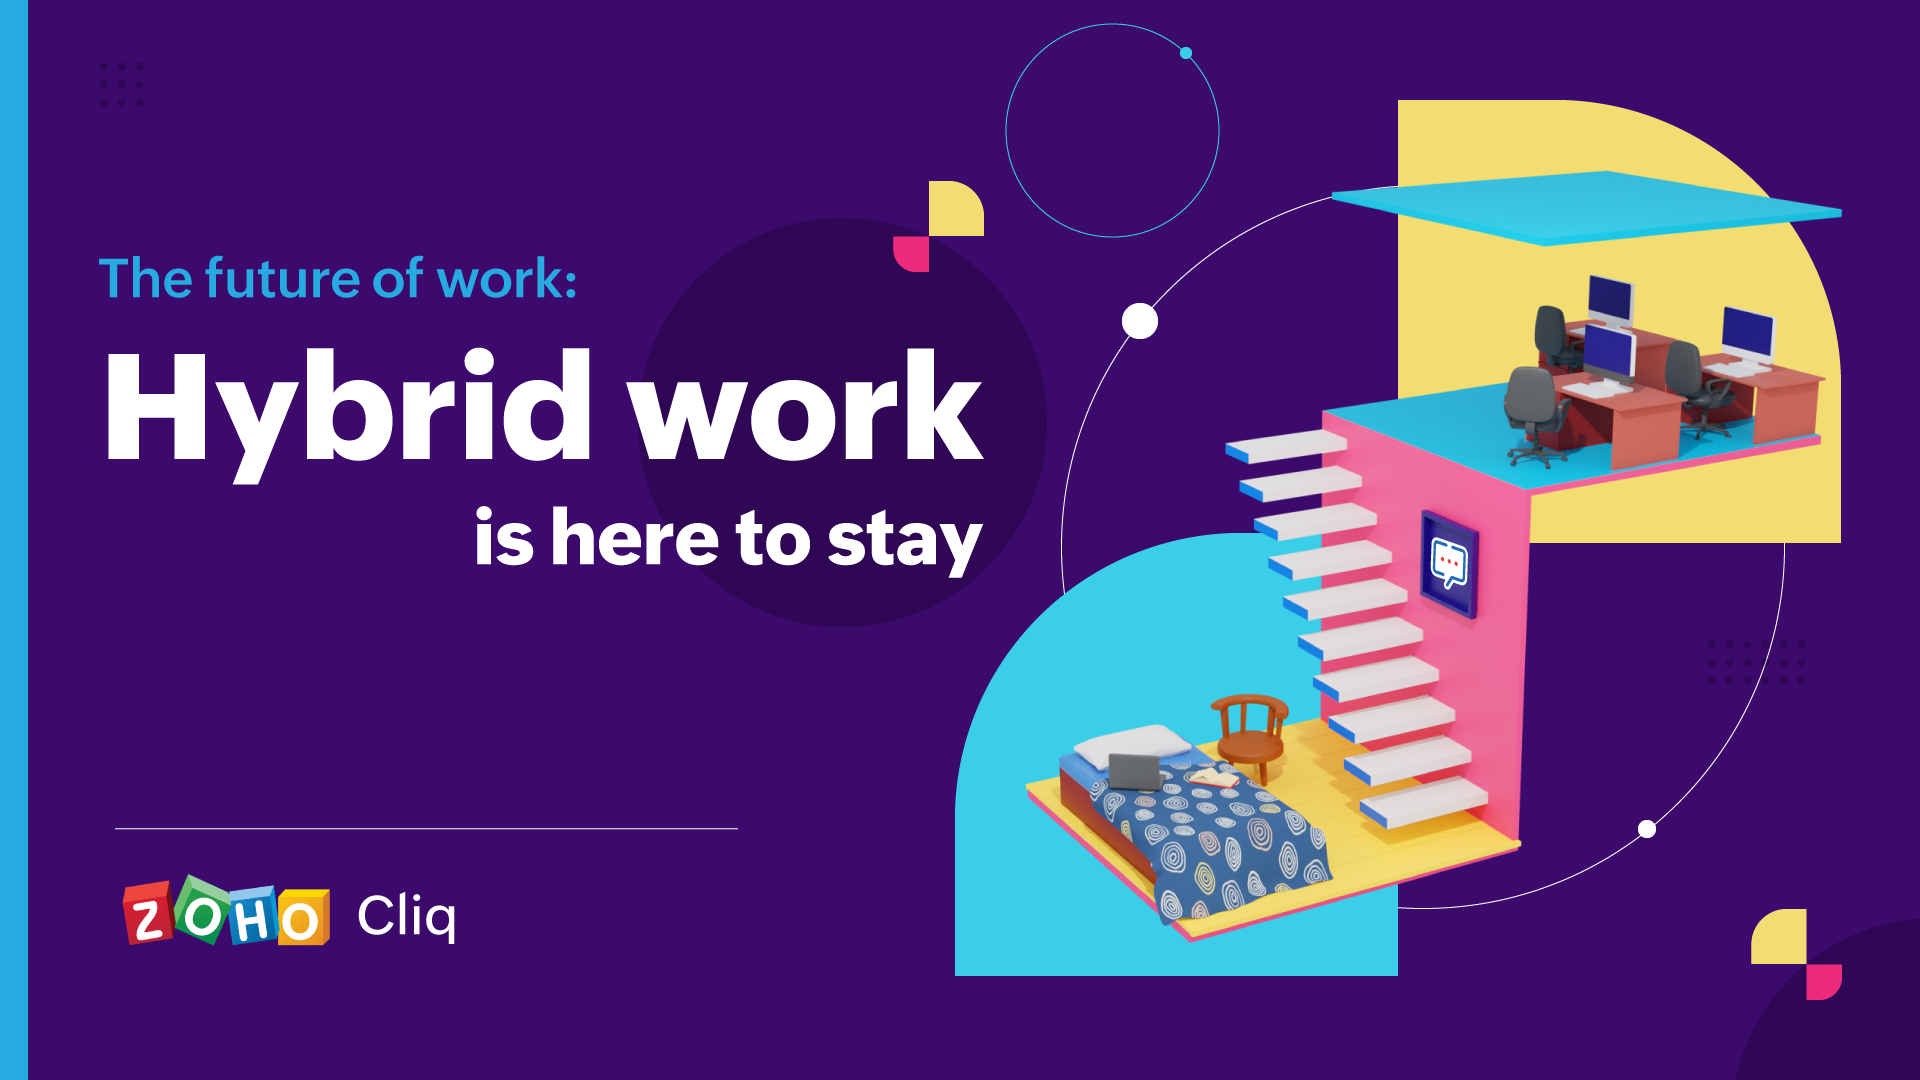 The future of work: Hybrid work is here to stay